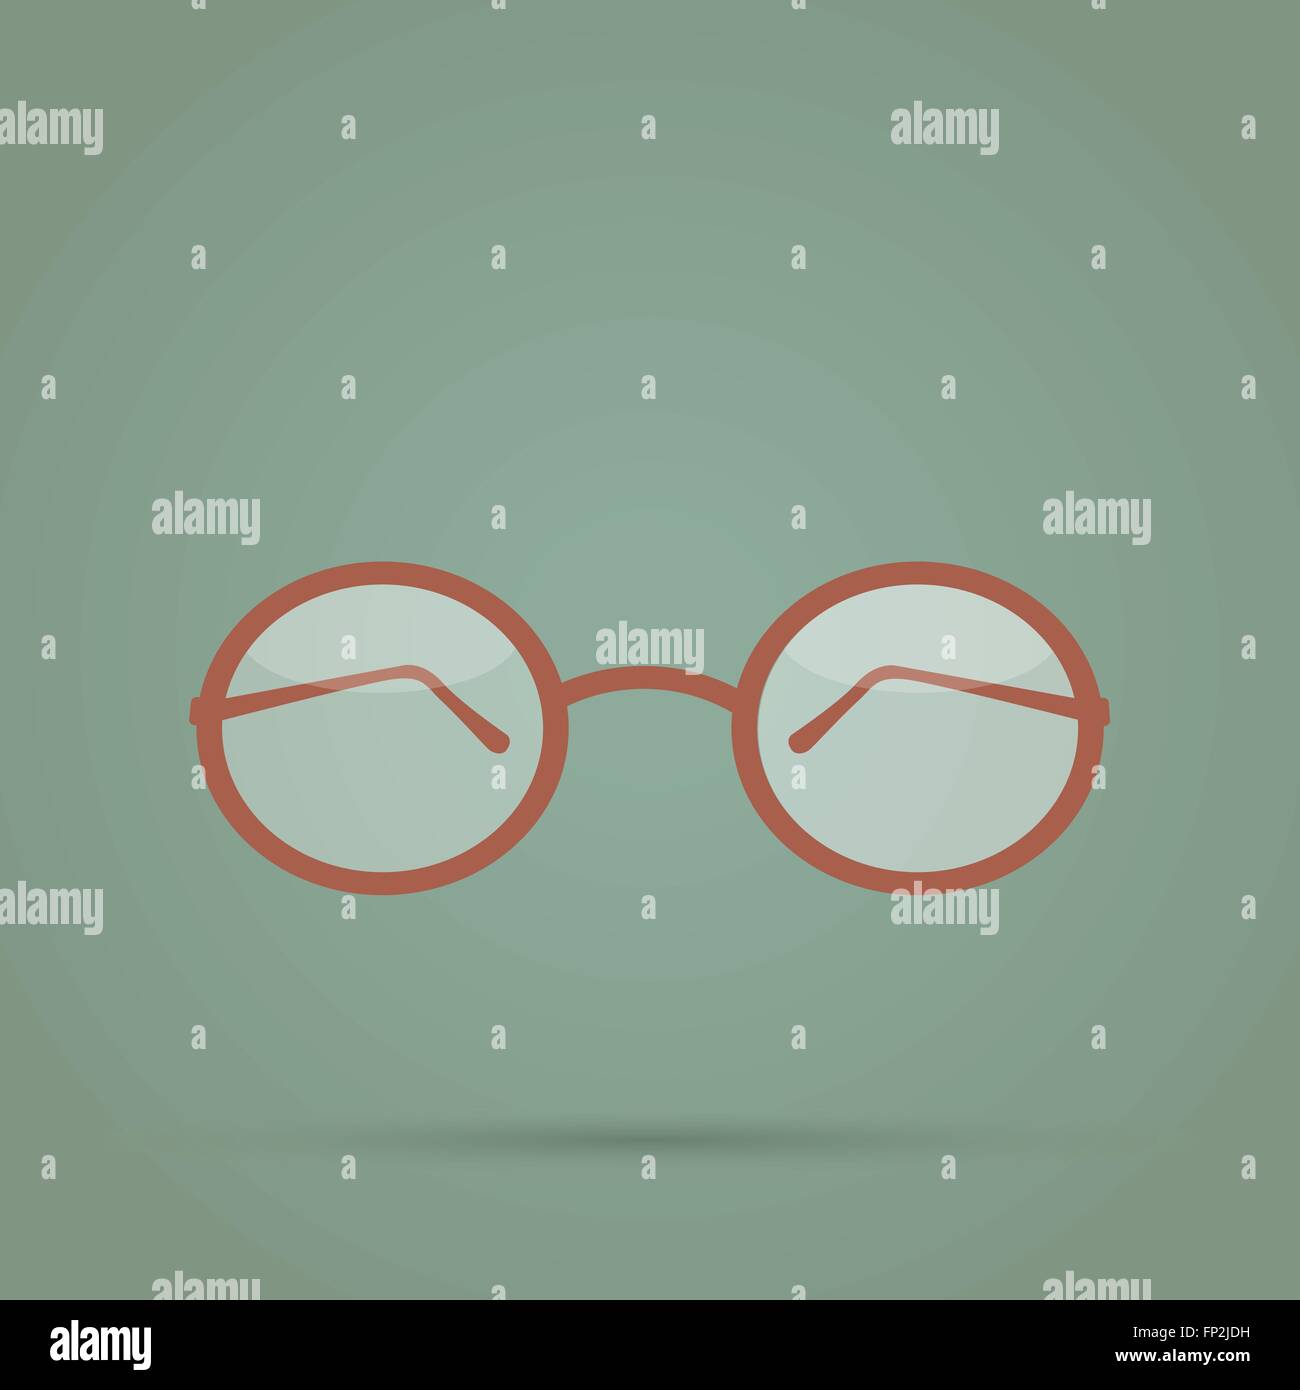 Illustration of reading glasses on a vintage background. Stock Vector